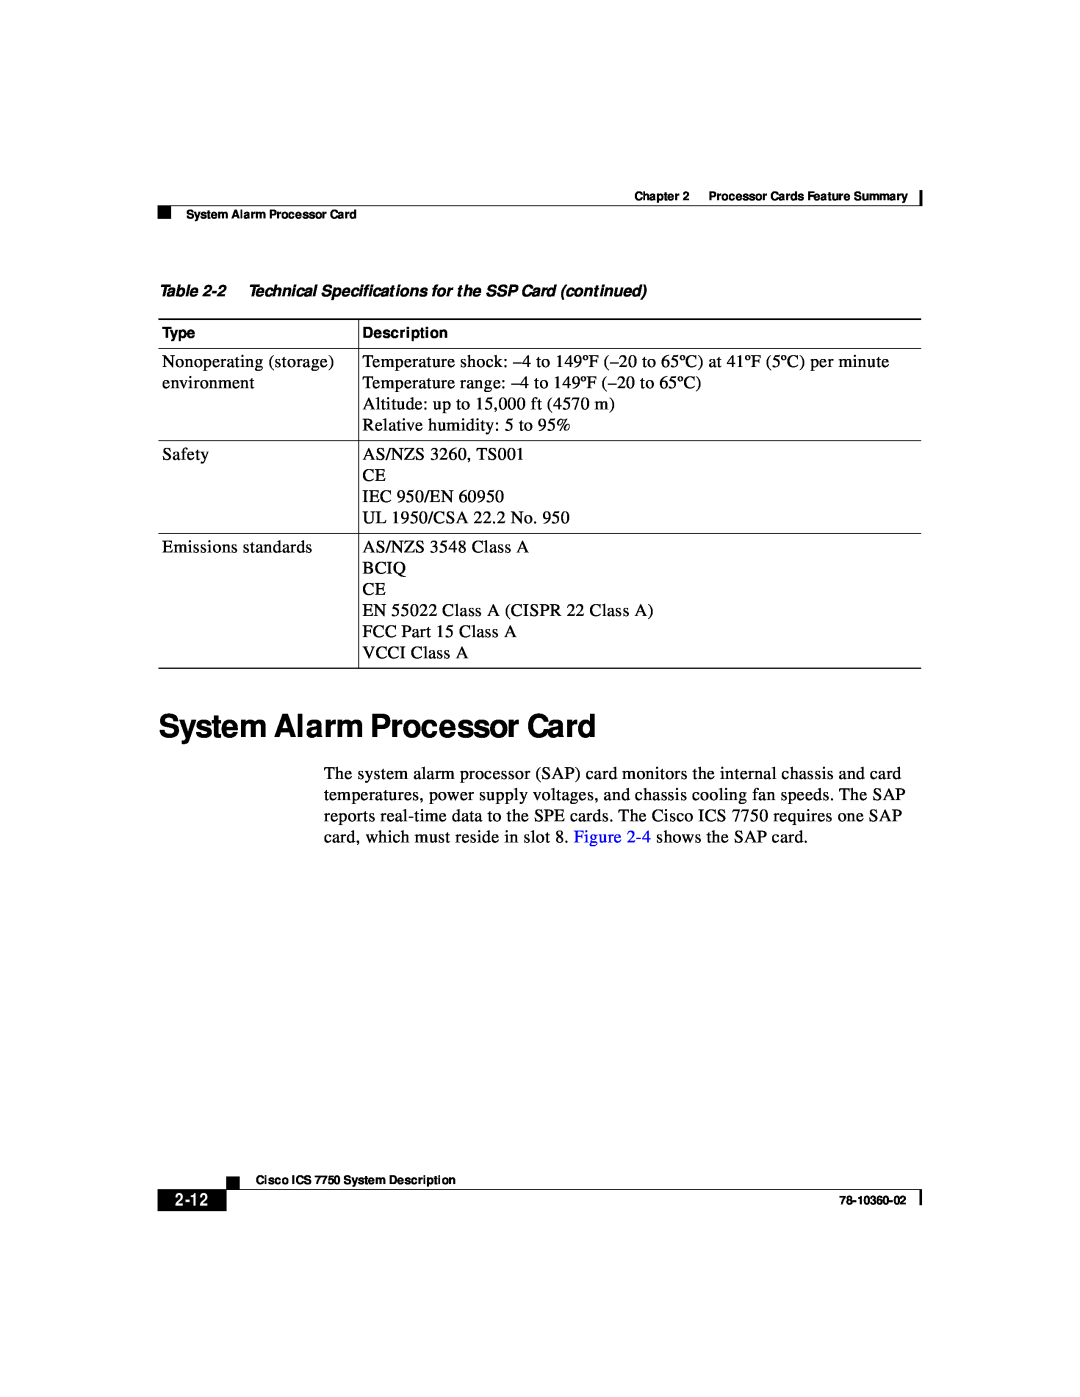 Cisco Systems ICS-7750 manual System Alarm Processor Card, 2-12, 2 Technical Specifications for the SSP Card continued 